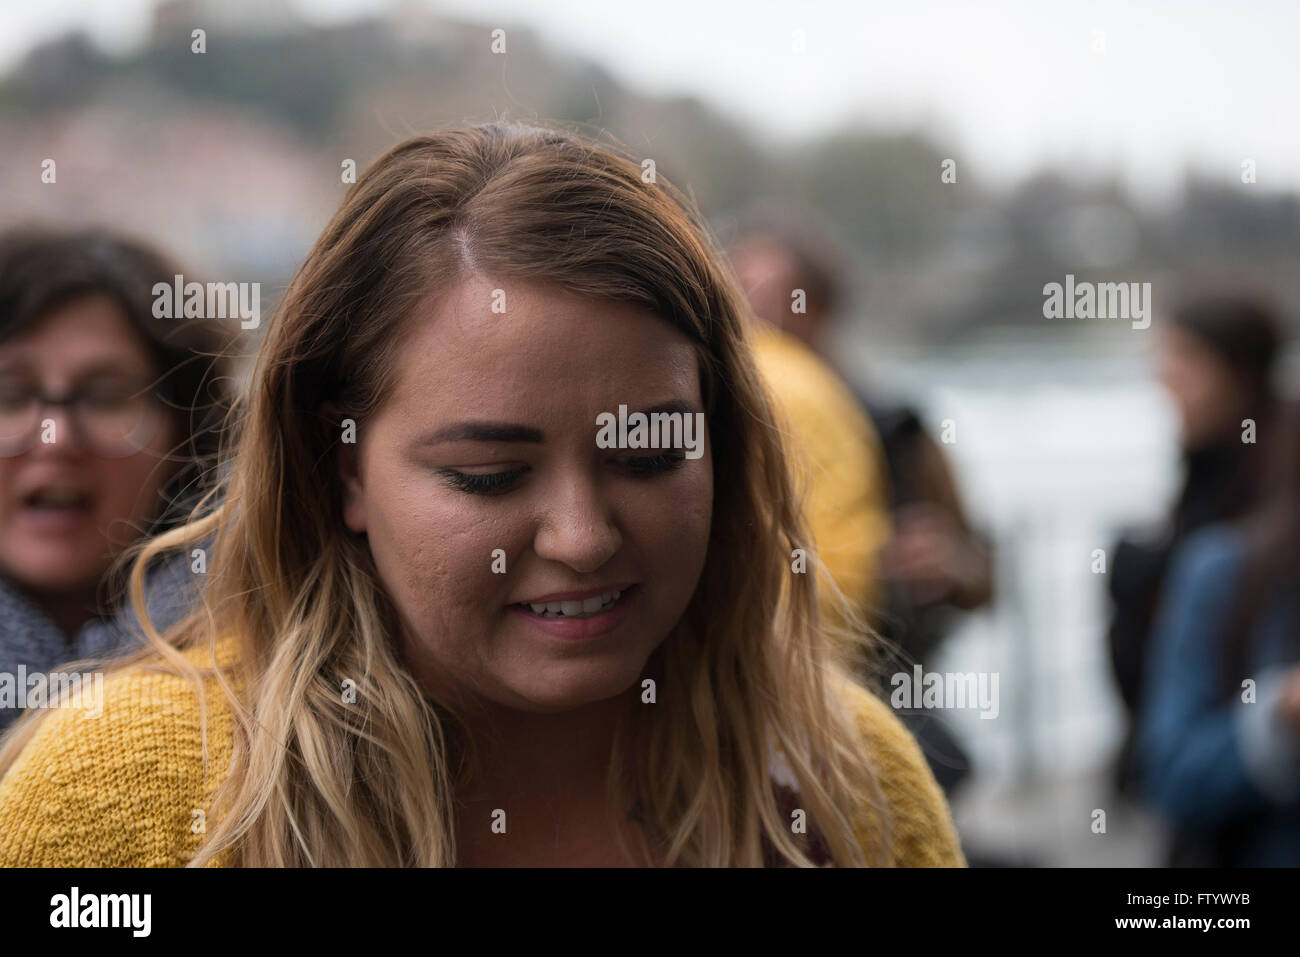 Turin, Italy. 30th Mar, 2016. Anna Todd writer from Texas, author of the book entitled 'After',  presents her latest book 'Before' for Salone OFF 365 on March 30, 2016 in Turin,Italy. Stock Photo